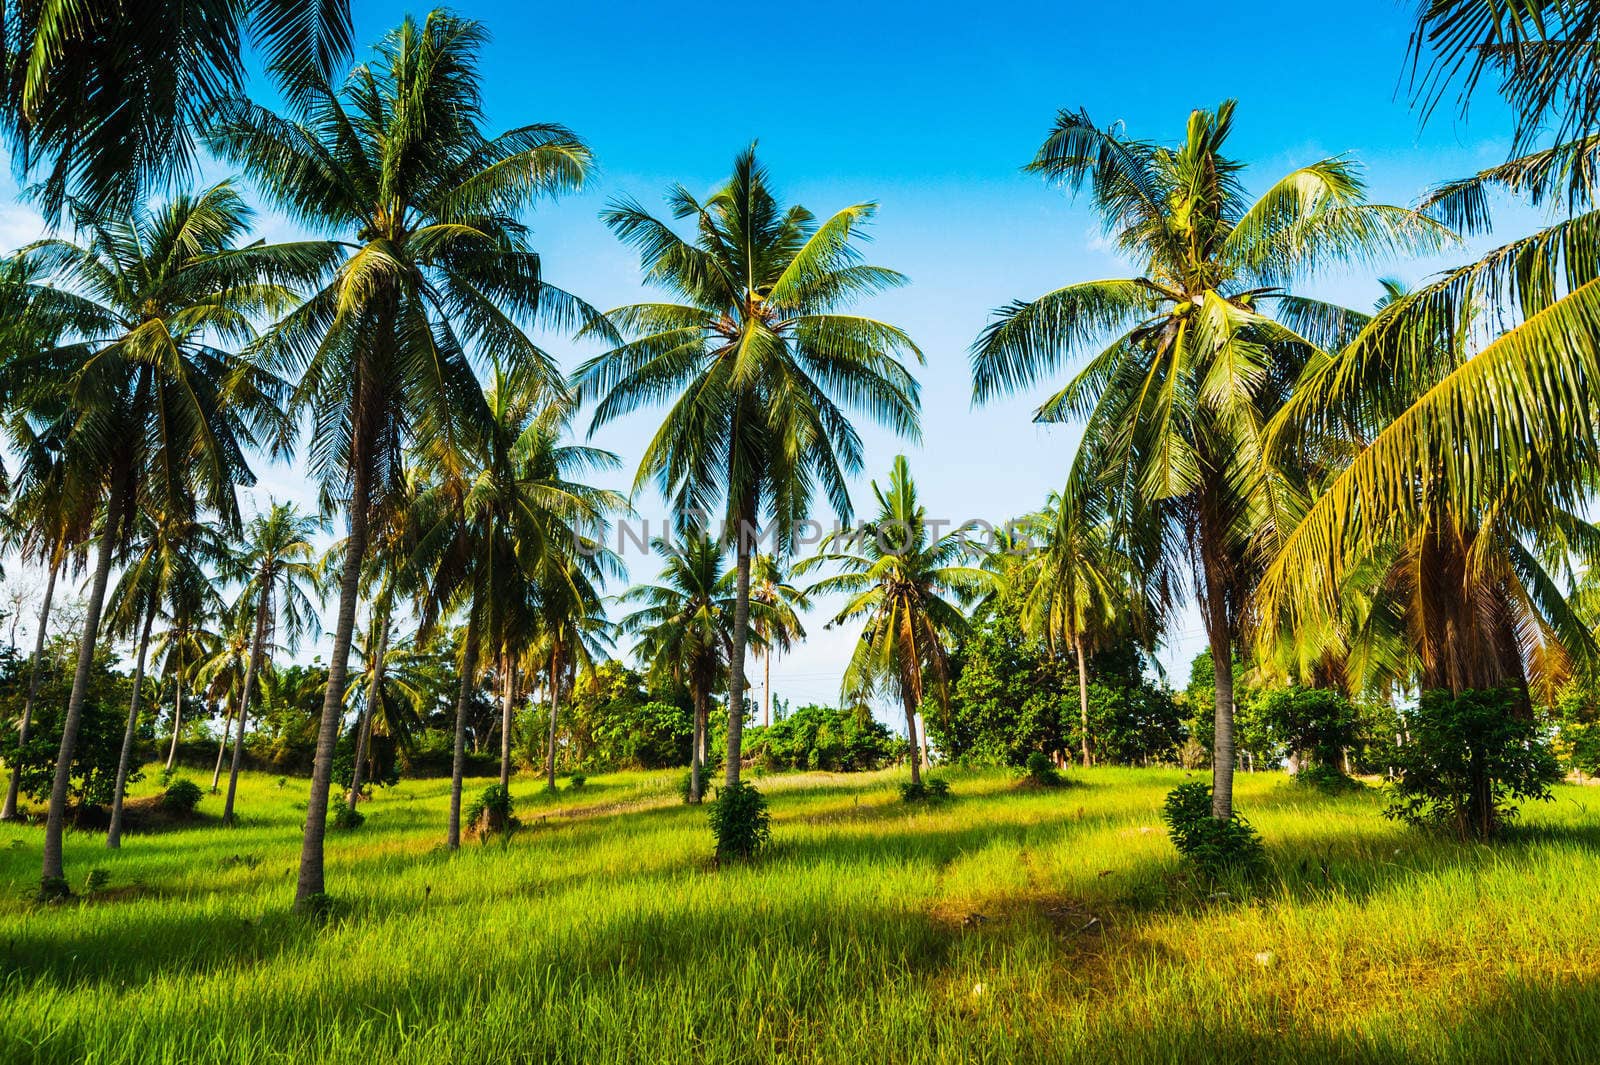 grove of coconut trees on a sunny day by oleg_zhukov